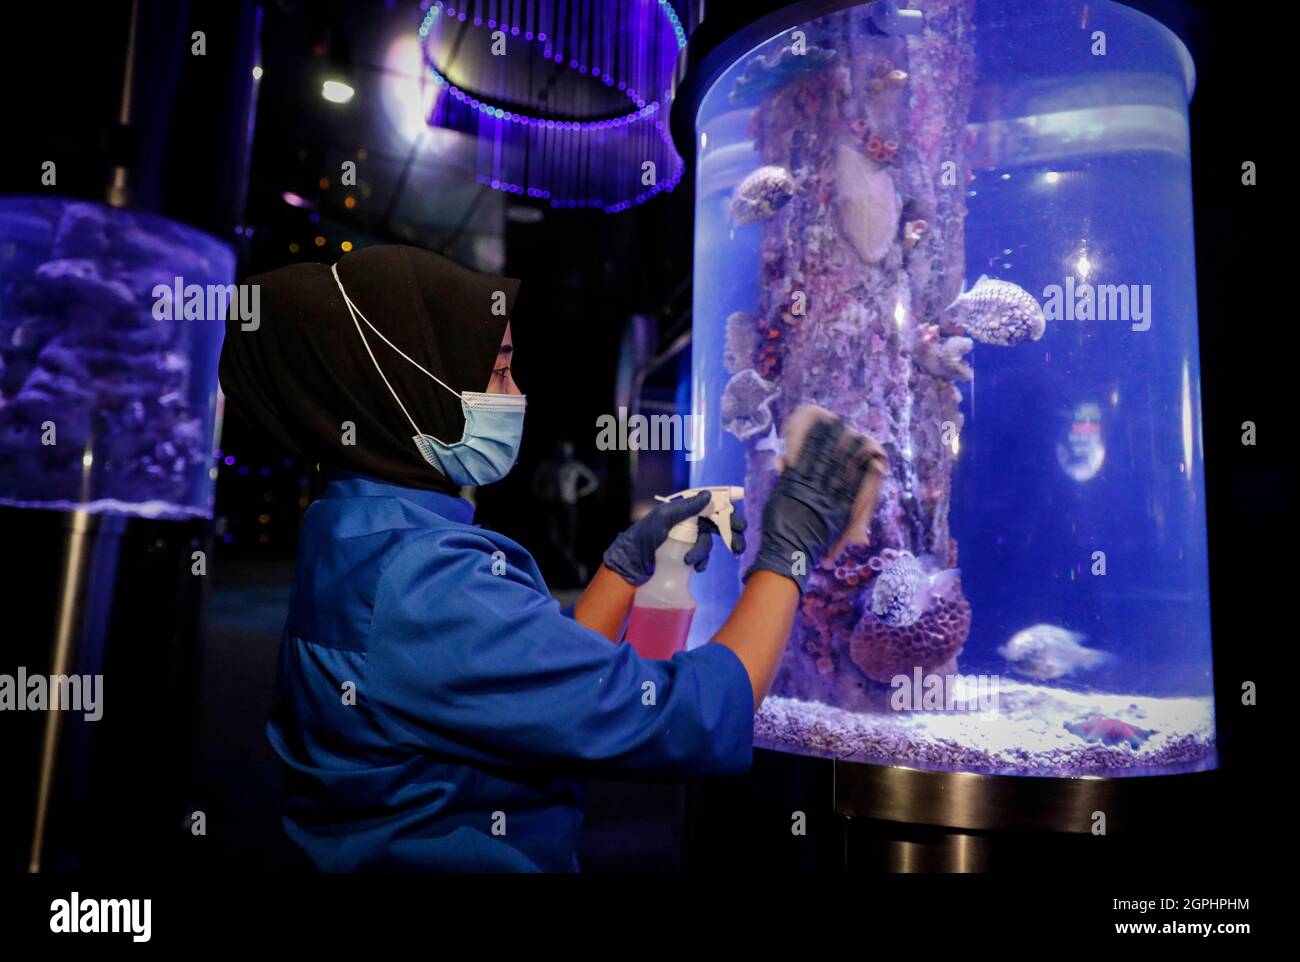 Kuala Lumpur, Malaysia. 29th Sep, 2021. A worker wearing a face mask seen cleaning at the Aquaria KLCC prior to re-opening to the public in Kuala Lumpur.Recreational parks will be allowed to open to public for activities under the Malaysia's National Recovery Plan amid the coronavirus pandemic restrictions. Credit: SOPA Images Limited/Alamy Live News Stock Photo